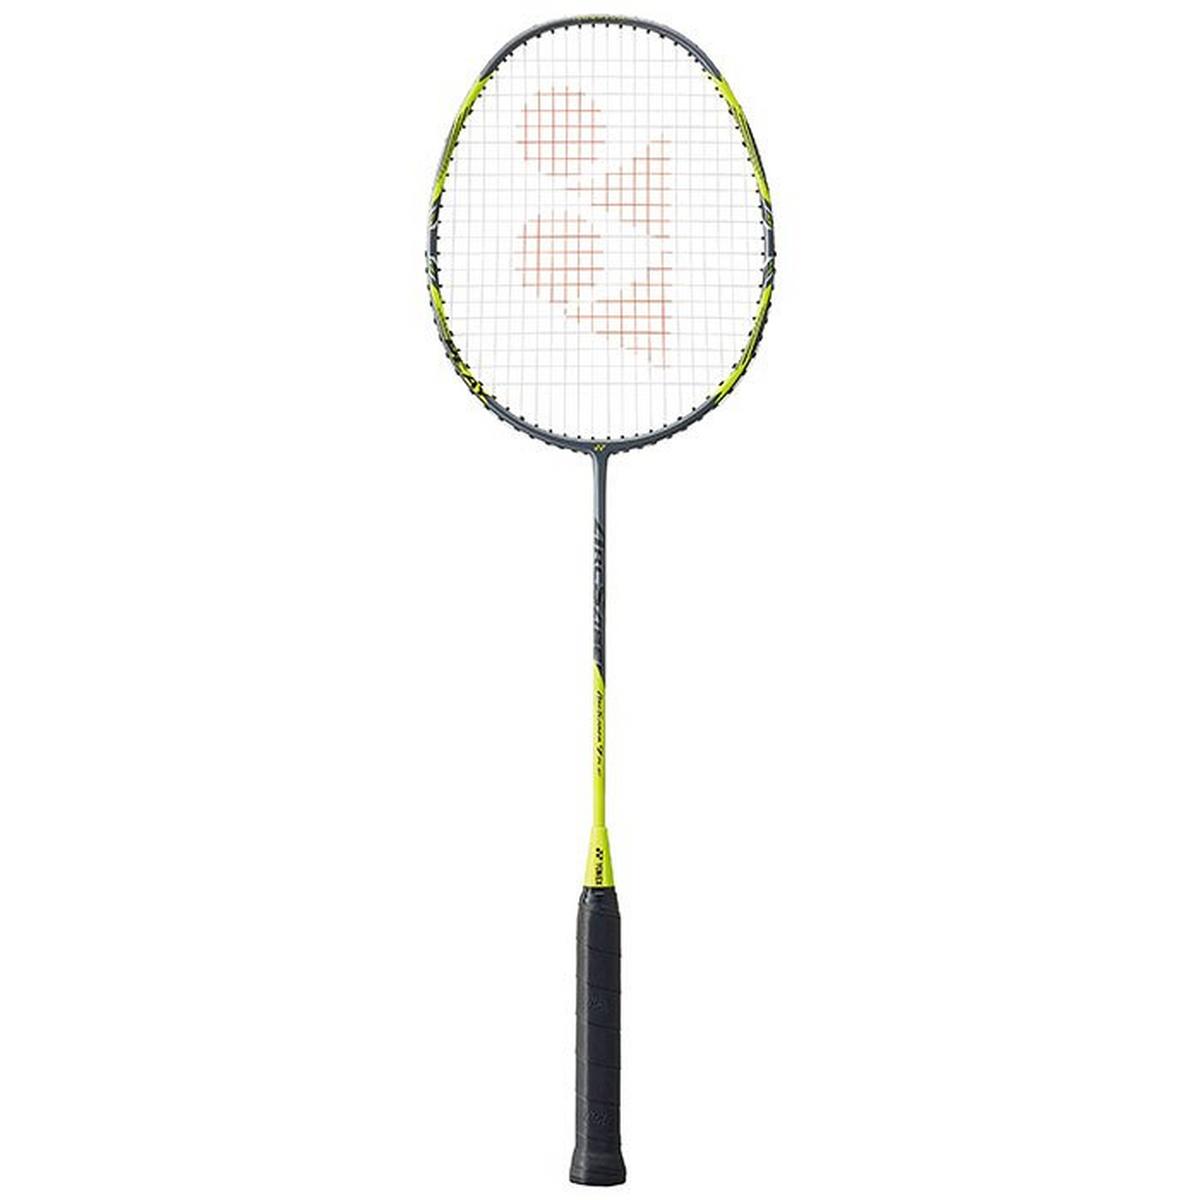 Arcsaber 7 Play Badminton Racquet with Free Cover